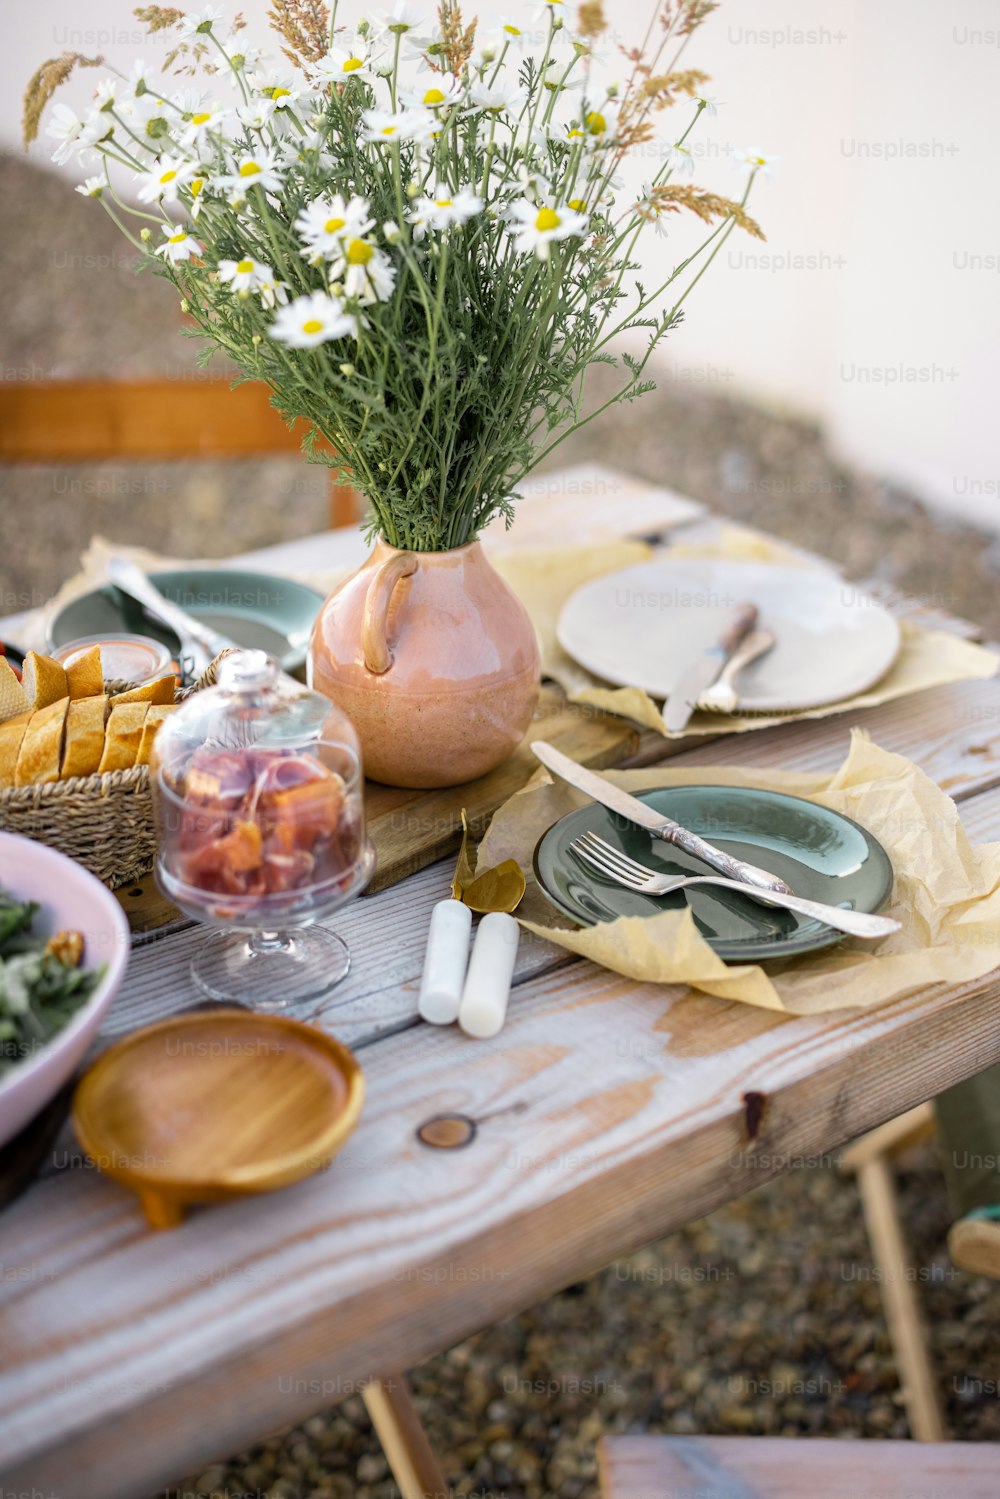 Beautifully served wooden table in natural boho style outdoors. Dining table decorated with field flowers, dishes and fresh food